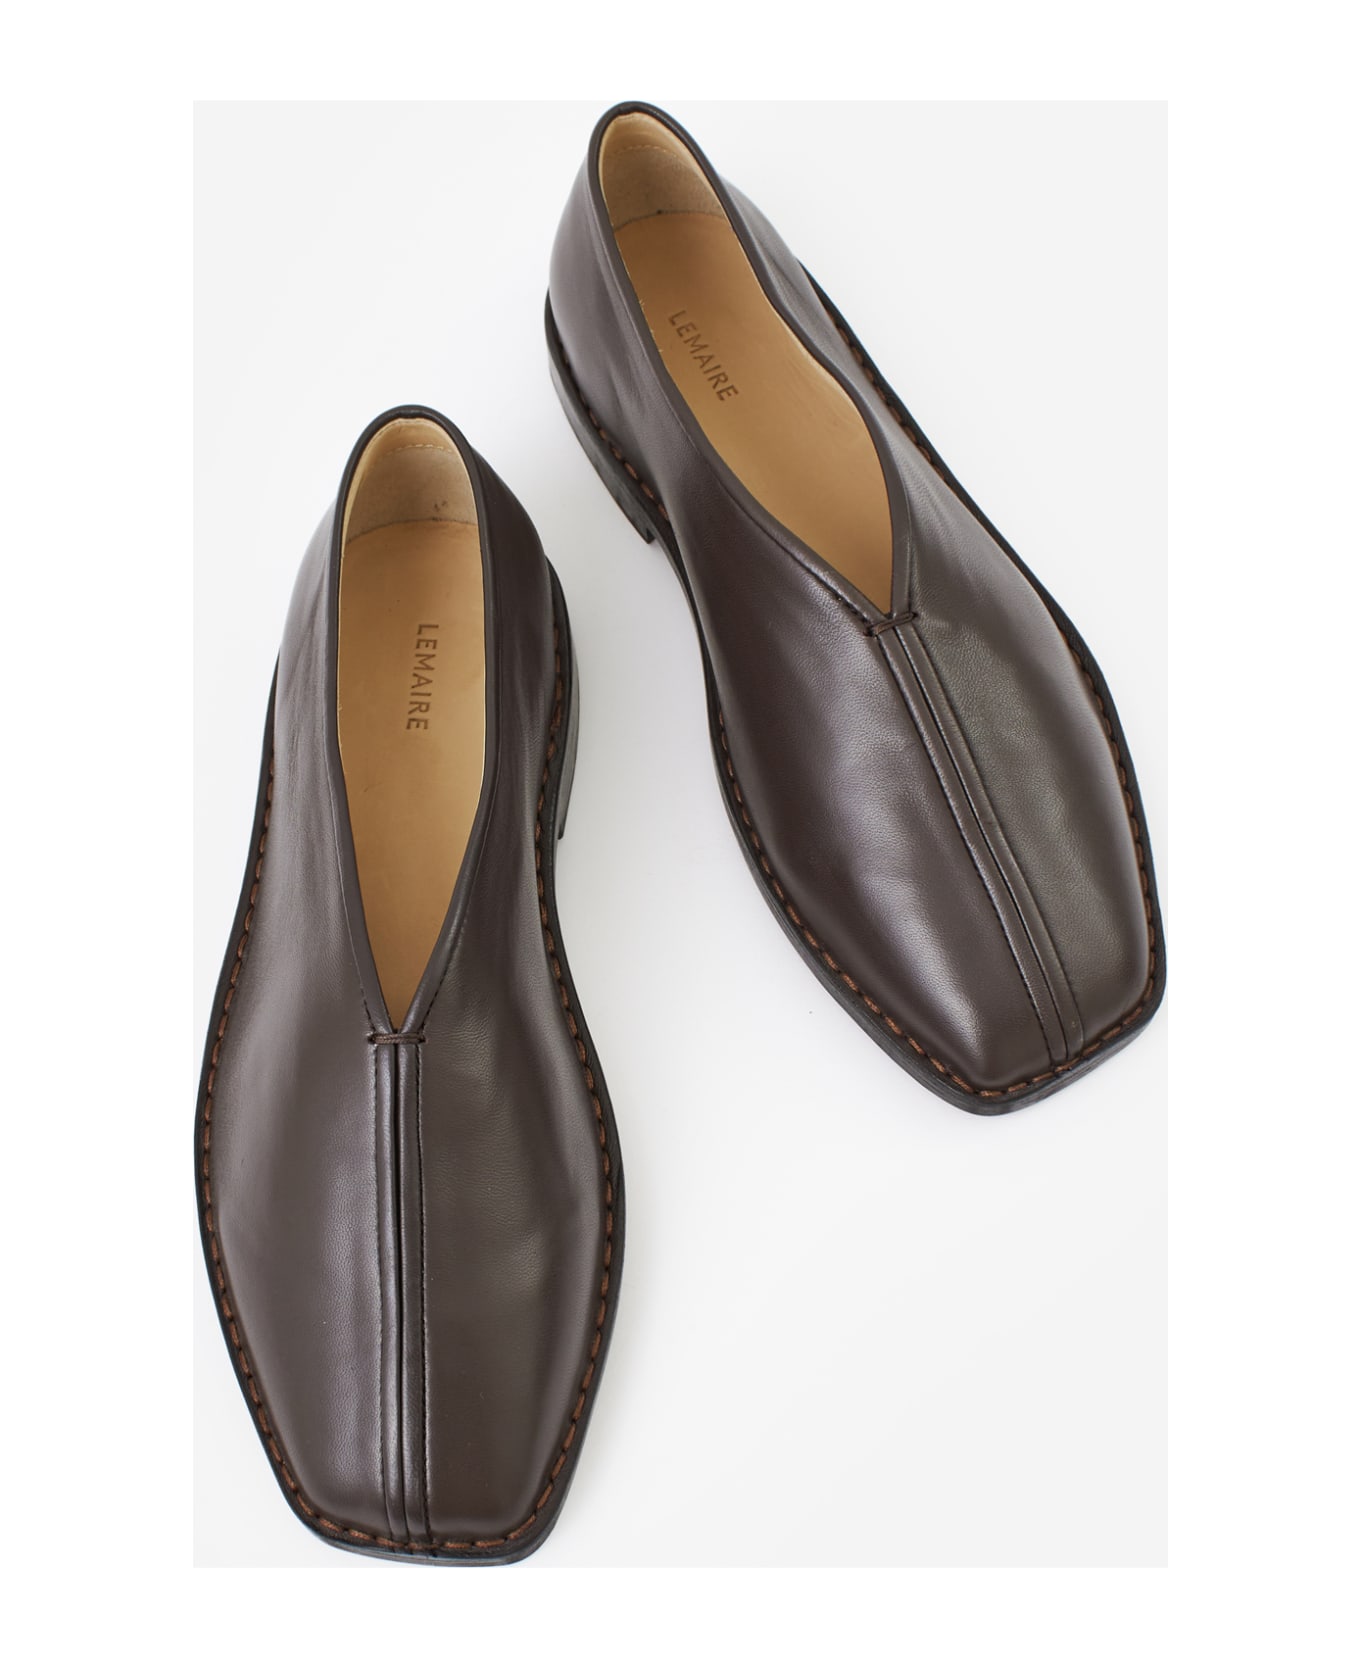 Lemaire Flat Piped Slippers Shoes - brown ローファー＆デッキシューズ